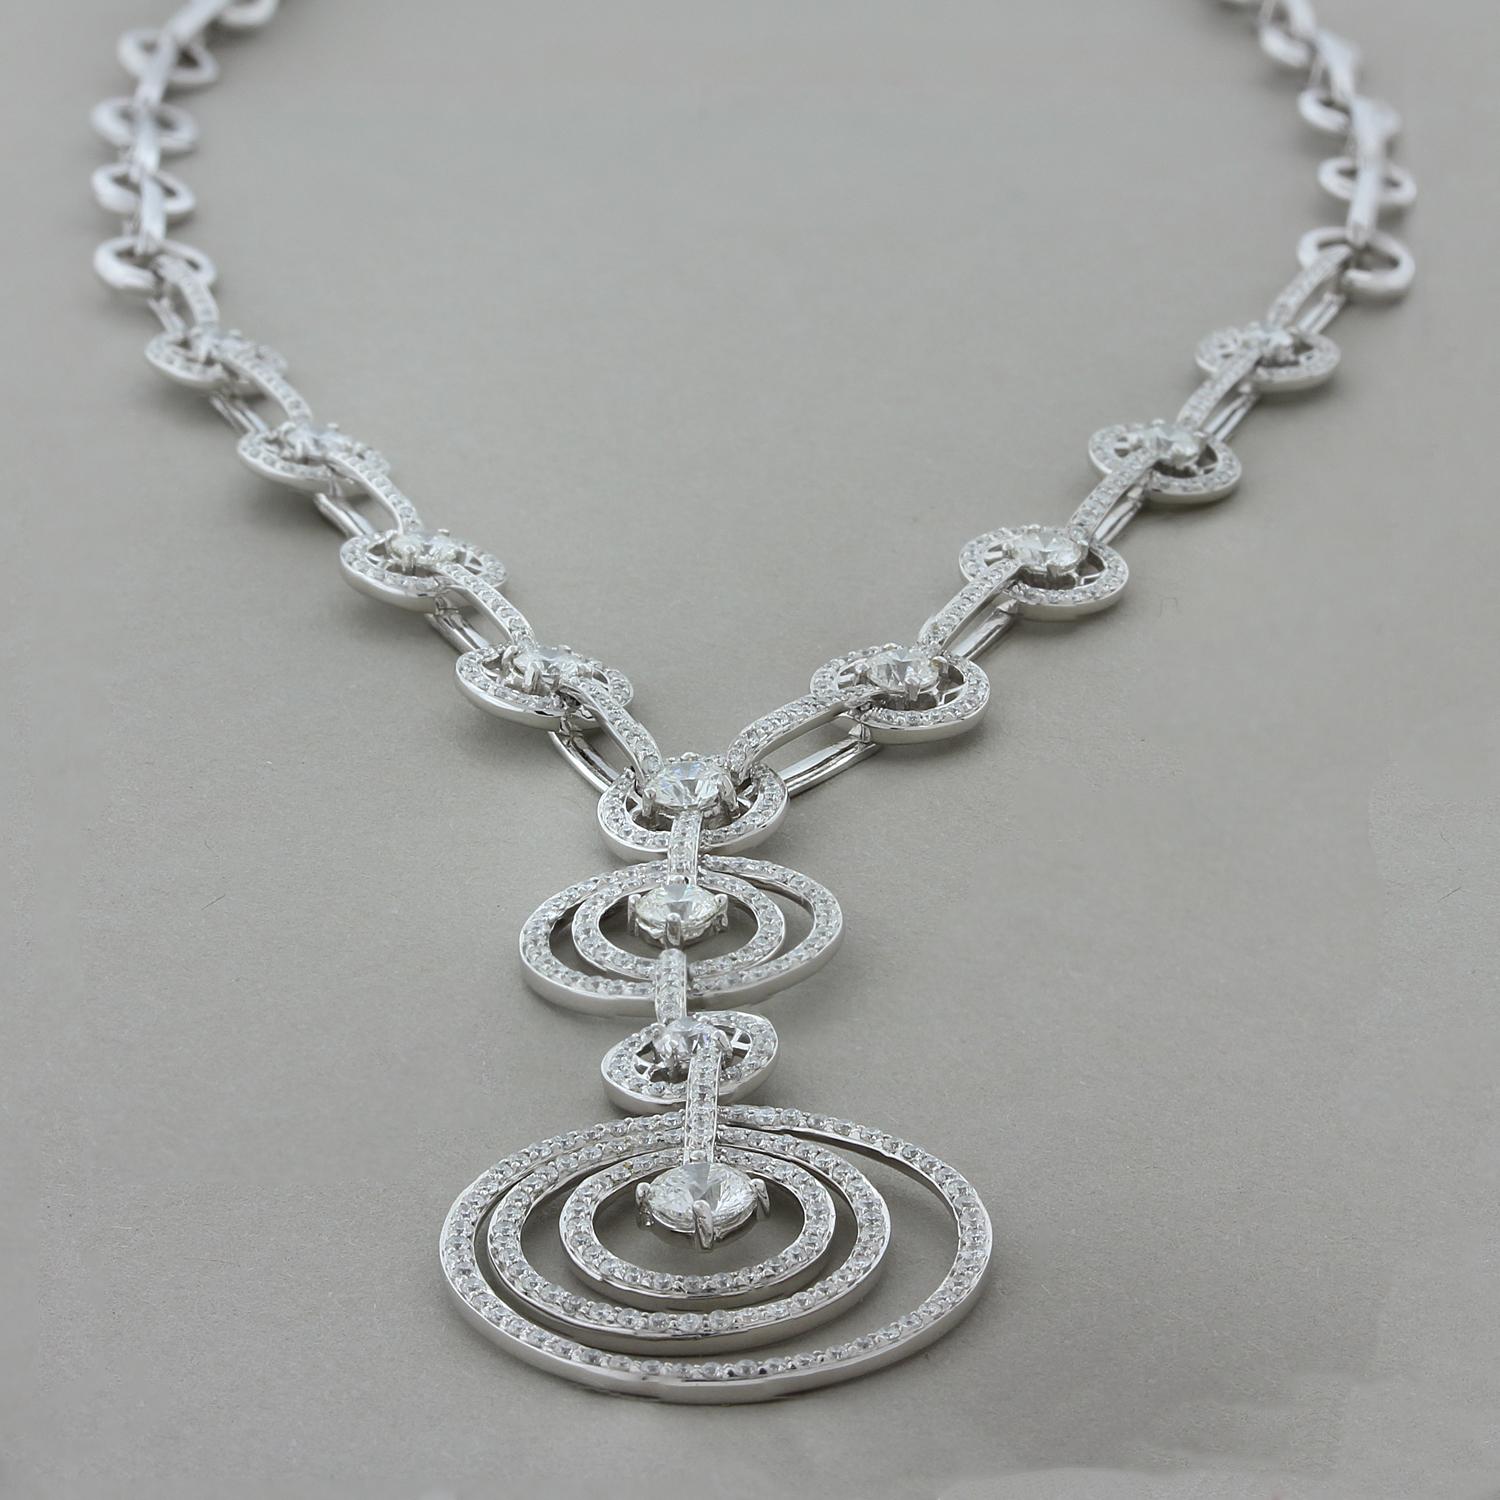 A spectacular necklace featuring 5.01 carats of round brilliant cut diamonds. The necklace drop has sets of halos which move independently of each other giving the piece movement. Set in 18K white gold with a box clasp closure and two safety